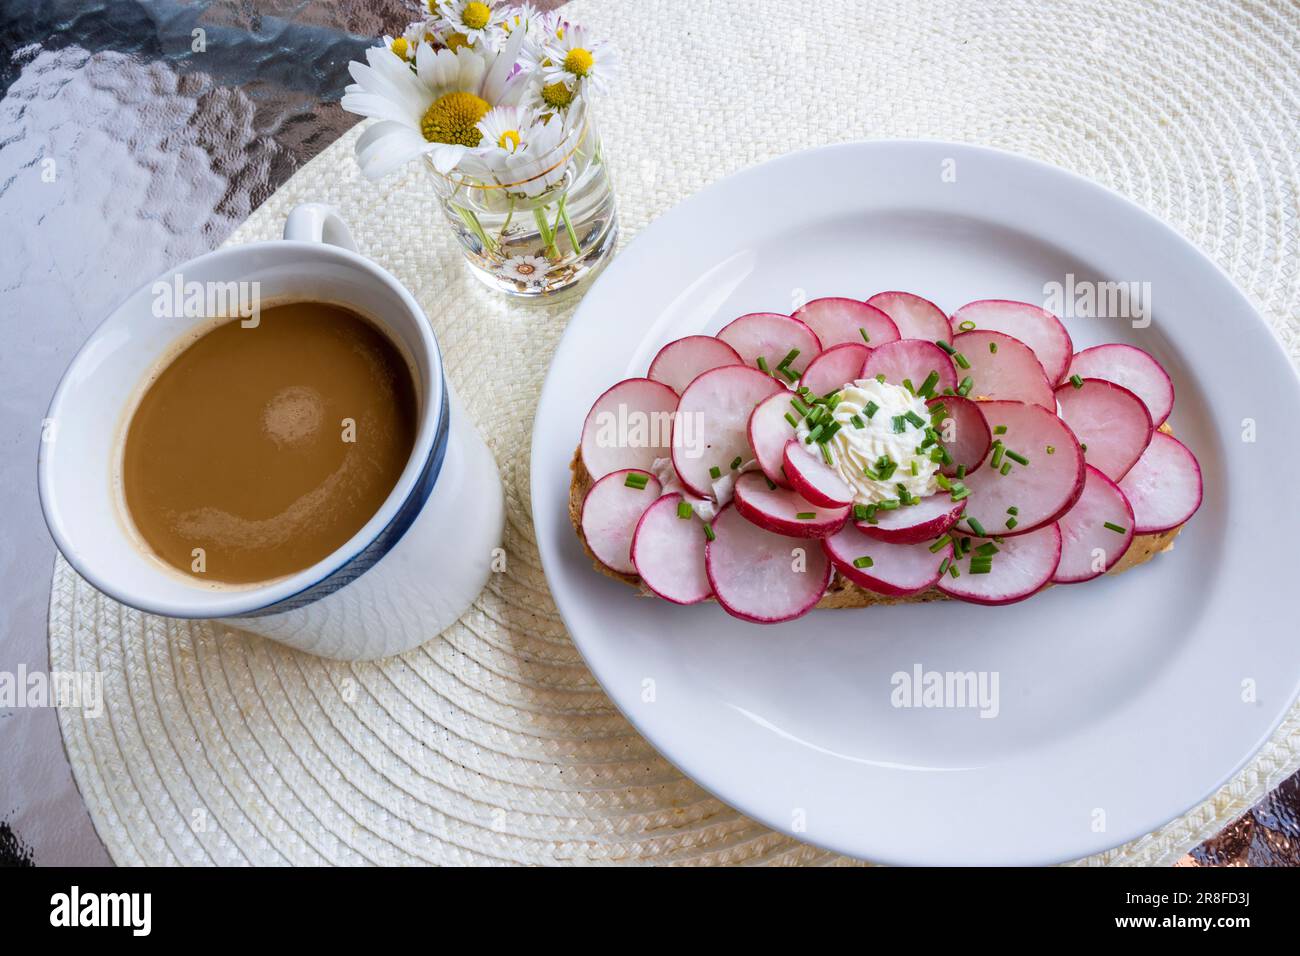 Bread garnished with radishes on white plate, cup of coffee, flowers on table. Stock Photo